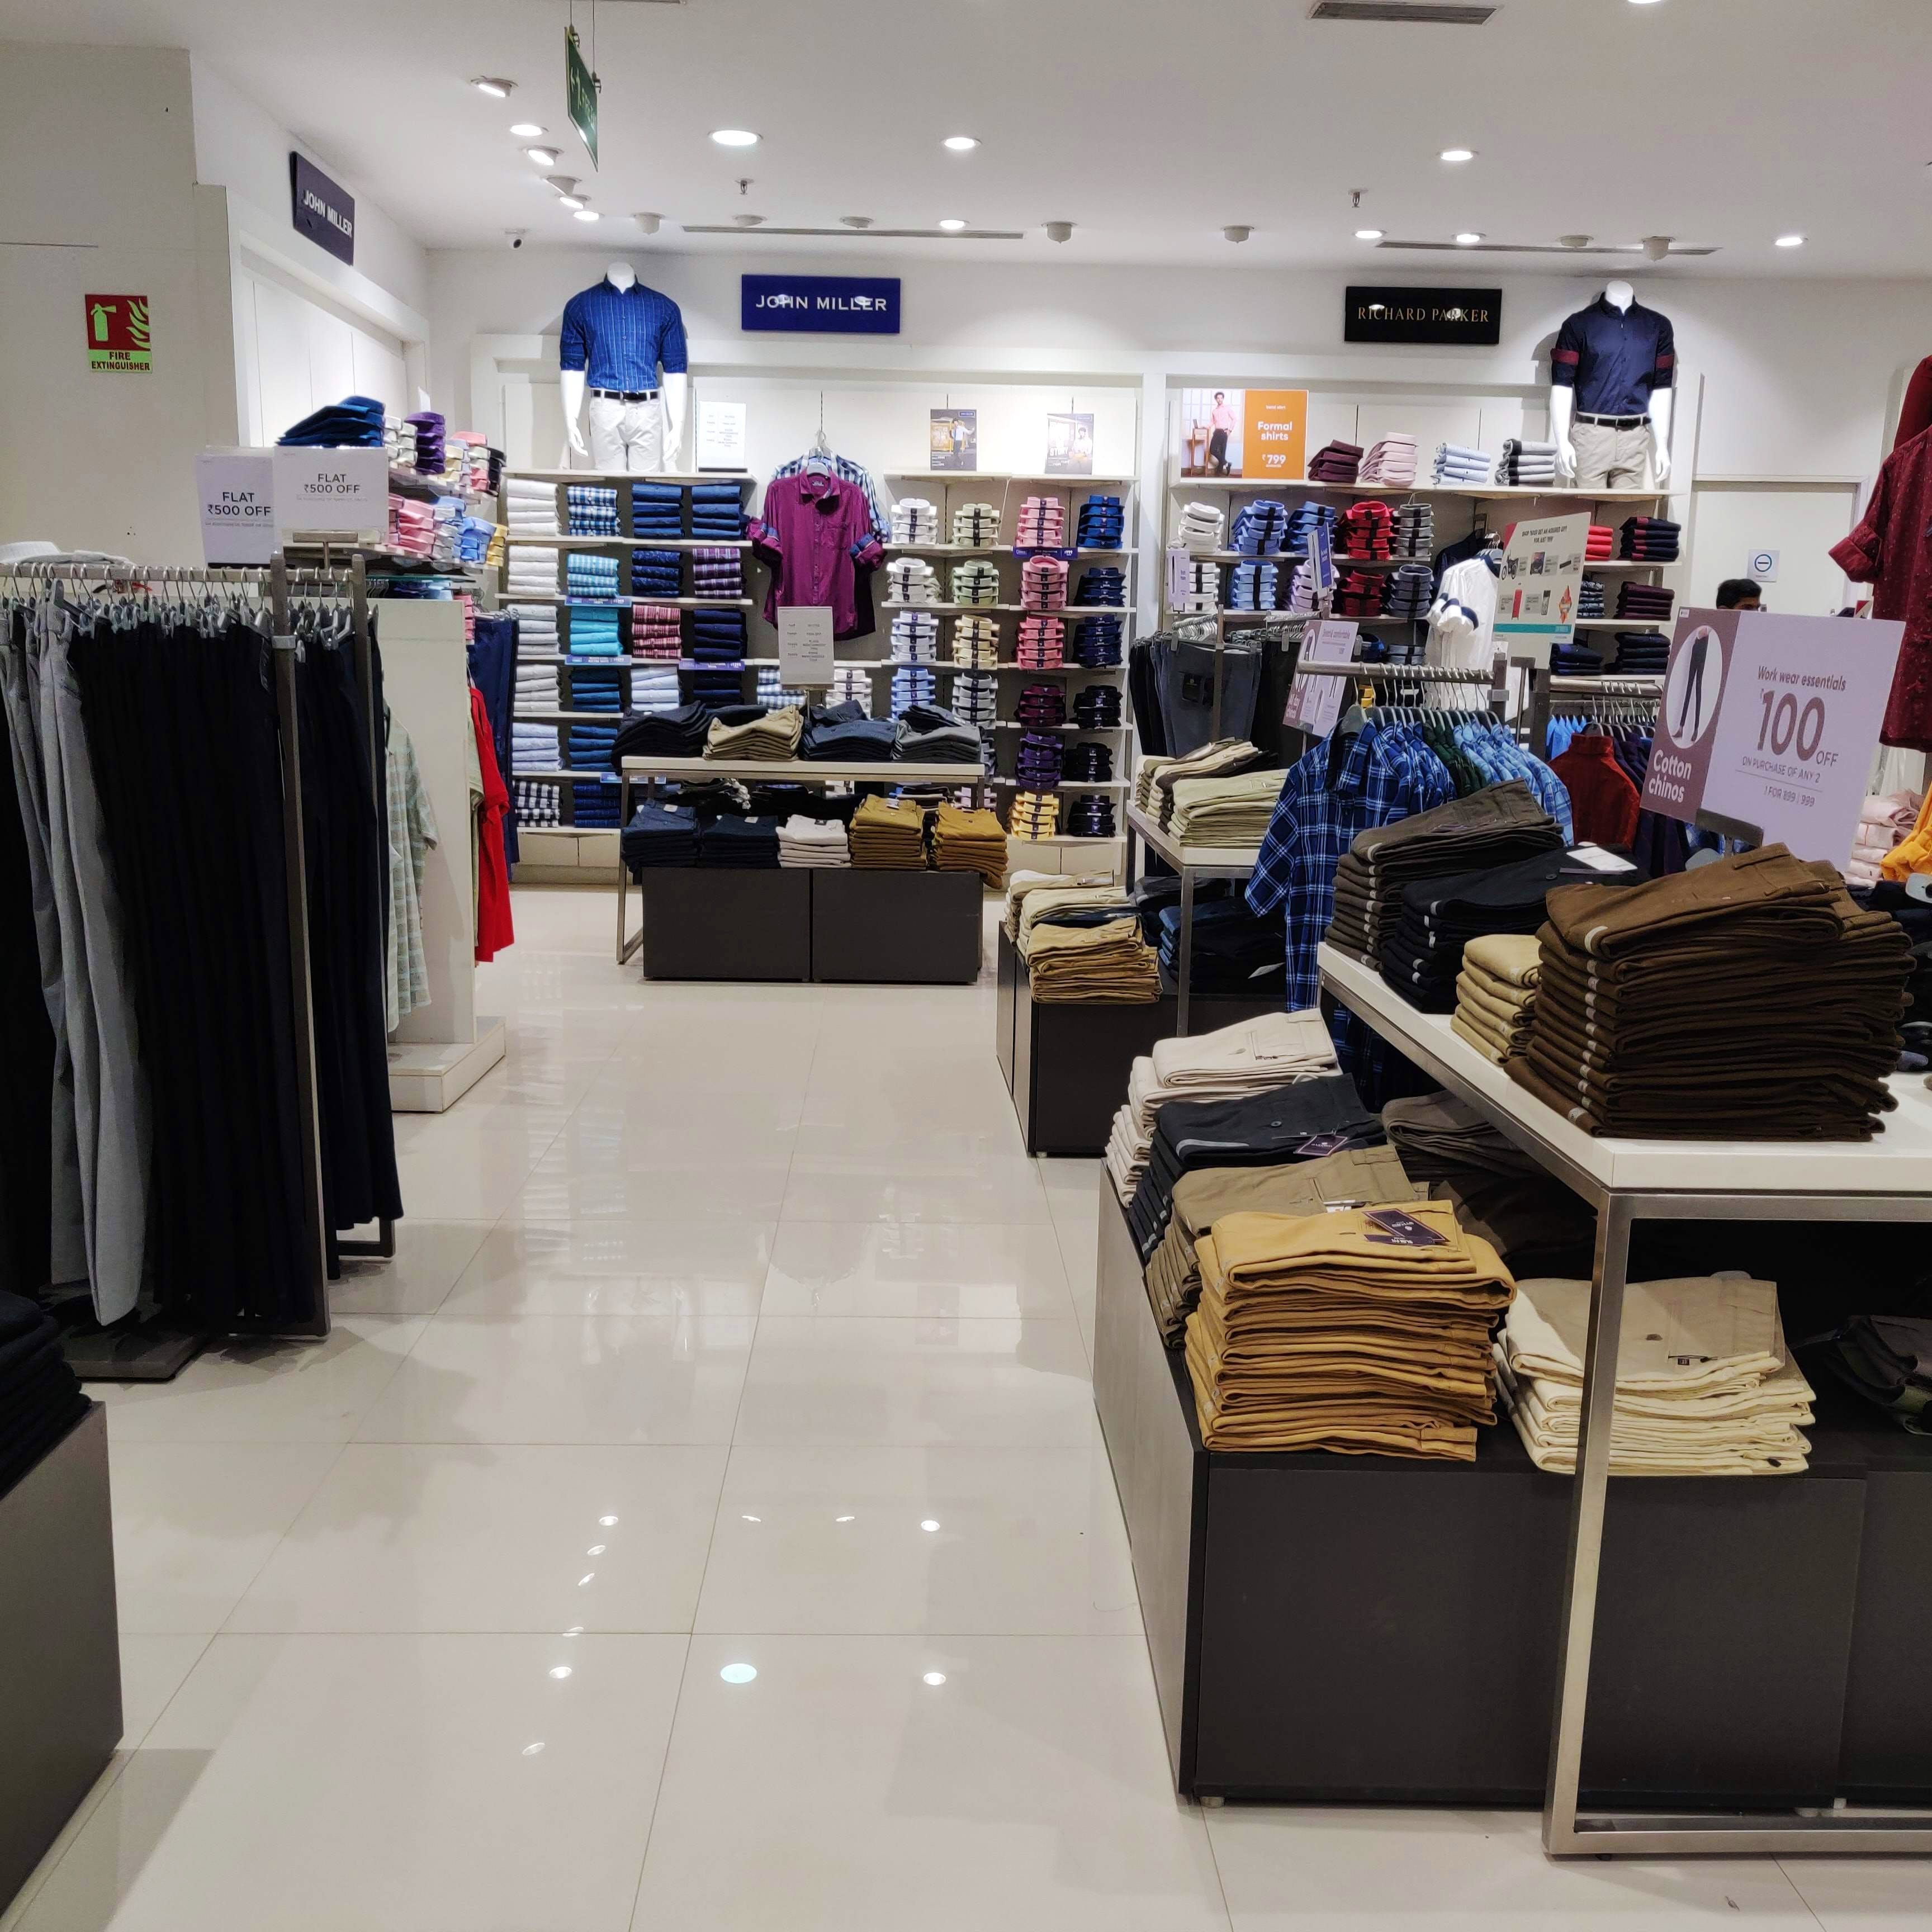 Outlet store,Boutique,Fashion,Retail,Building,Floor,Footwear,Interior design,Flooring,Shopping